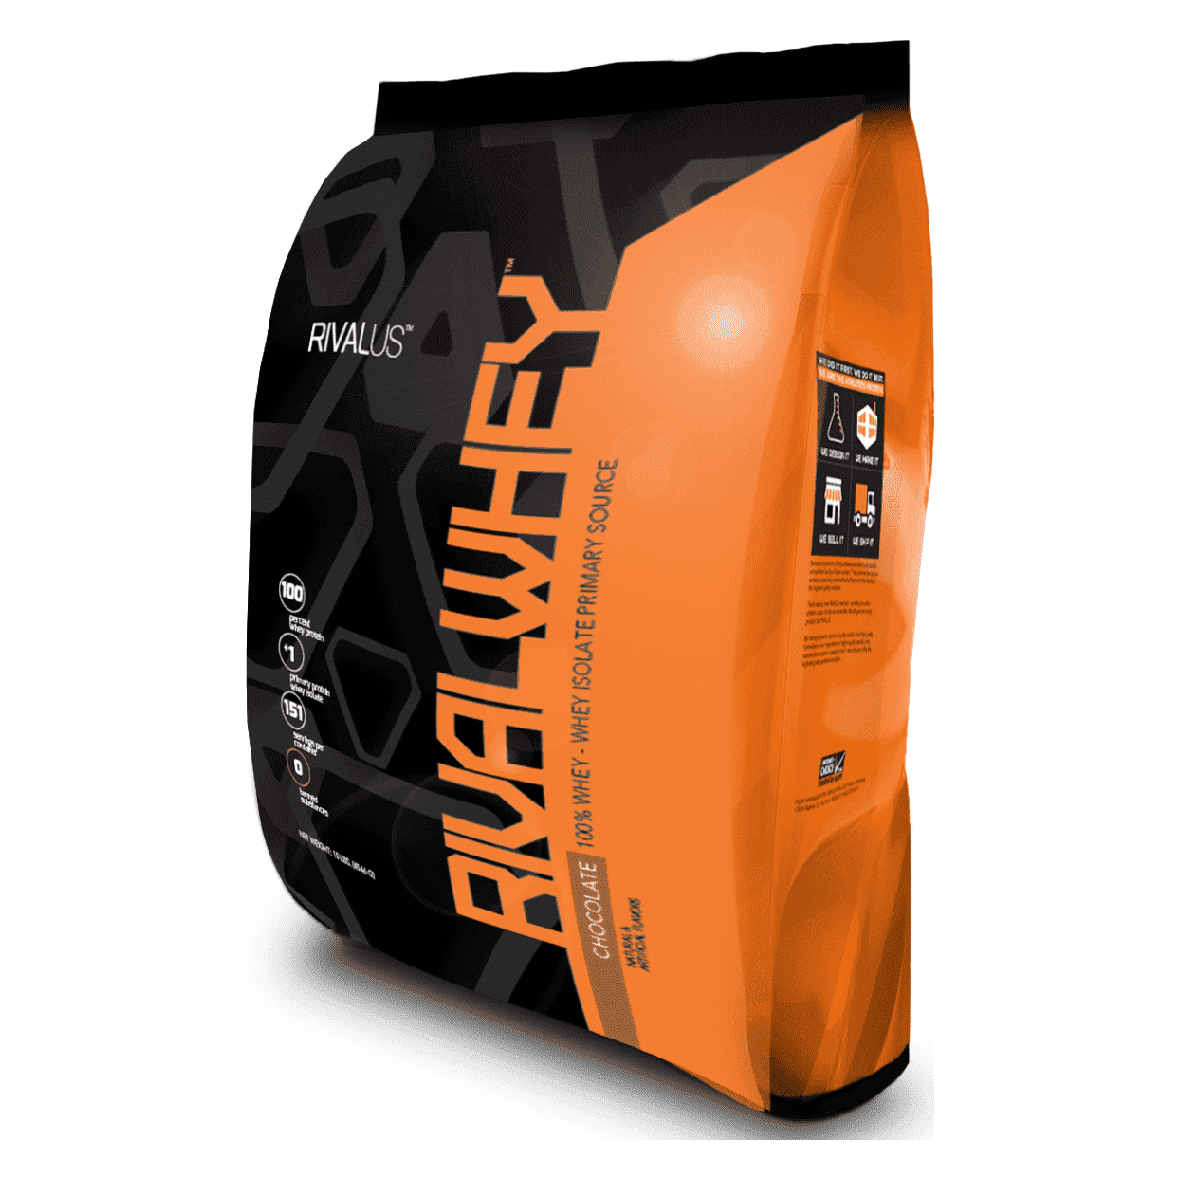 CLEAN GAINER BY RIVAL US - Stacked Supps